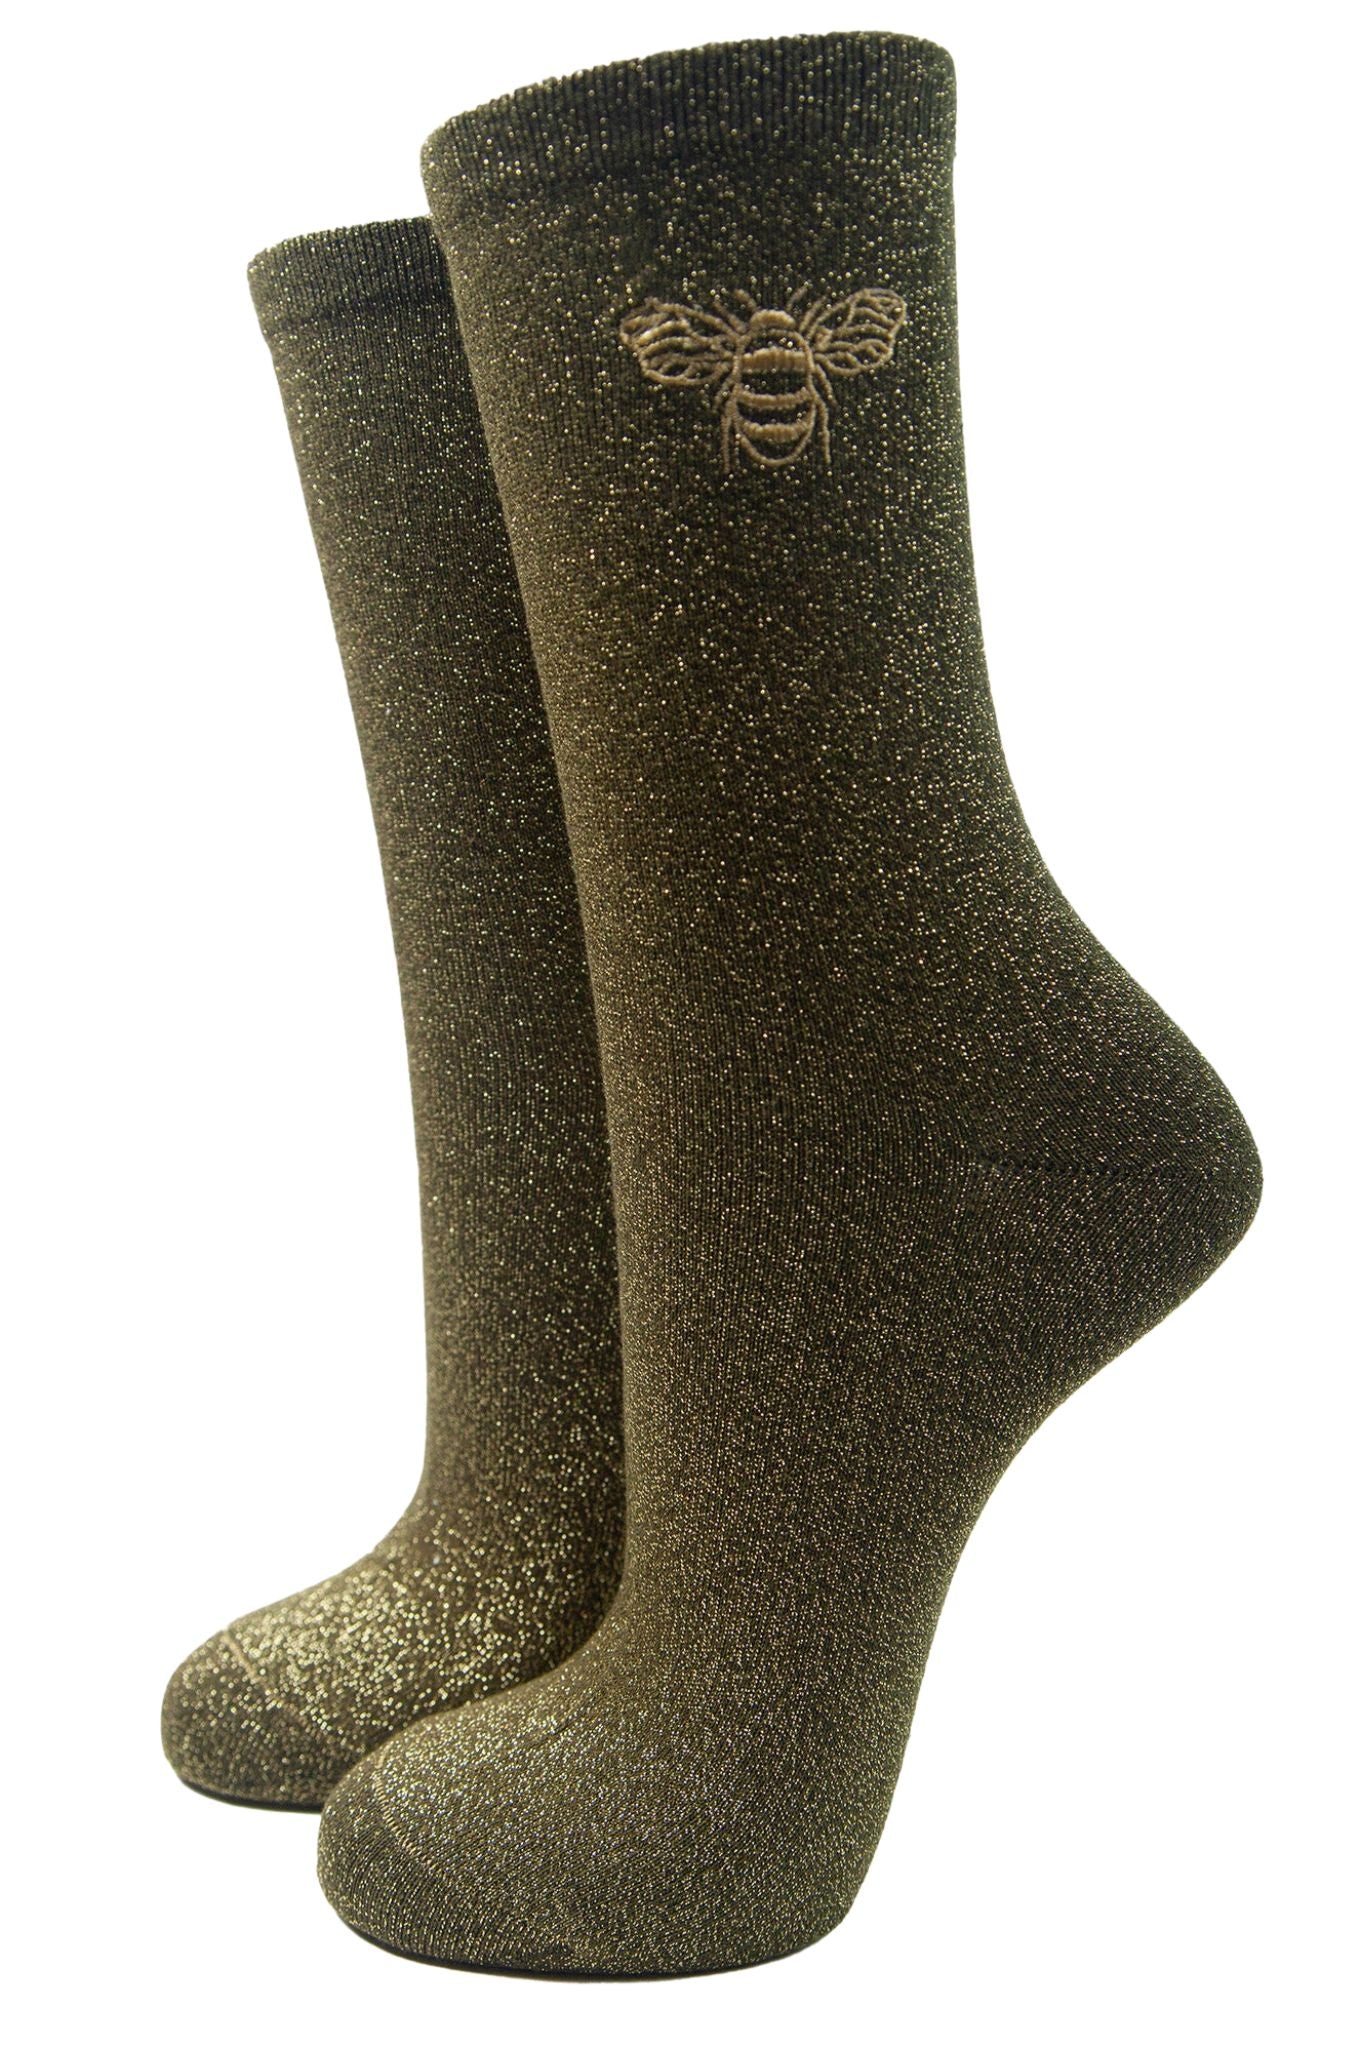 khaki green and gold glitter socks with a gold embroidered bee